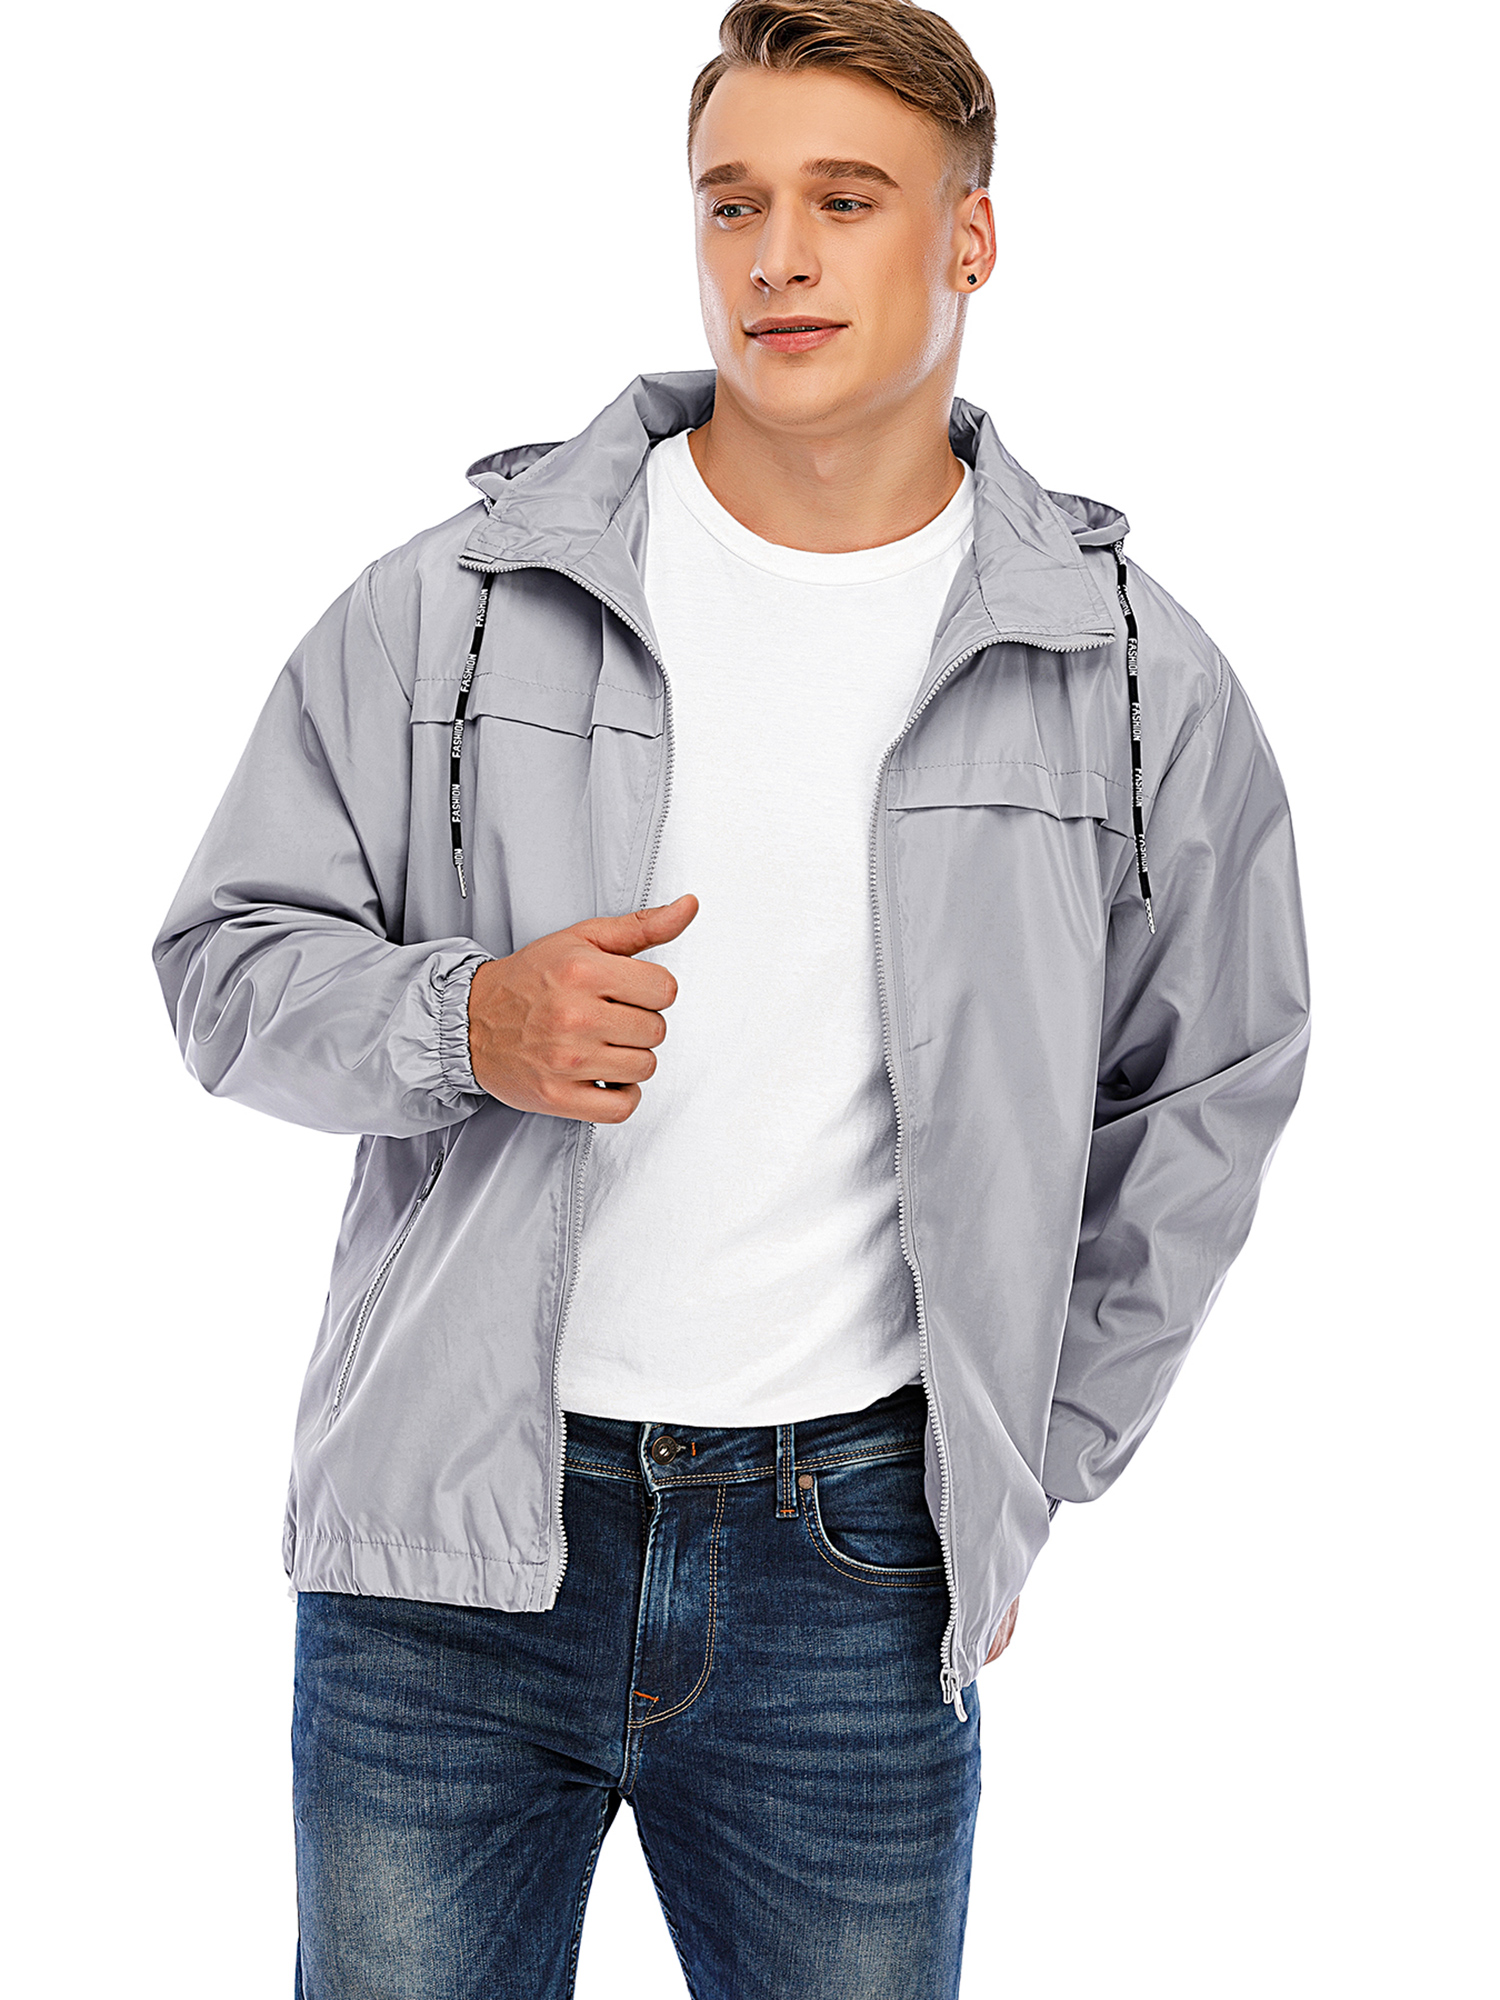 Men Hooded Waterproof Outdoor Jacket Lightweight Rain Jacket Windproof Water Resistant Jacket for Hiking Casual Work, Big & Tall up to Size 3XL - image 4 of 8